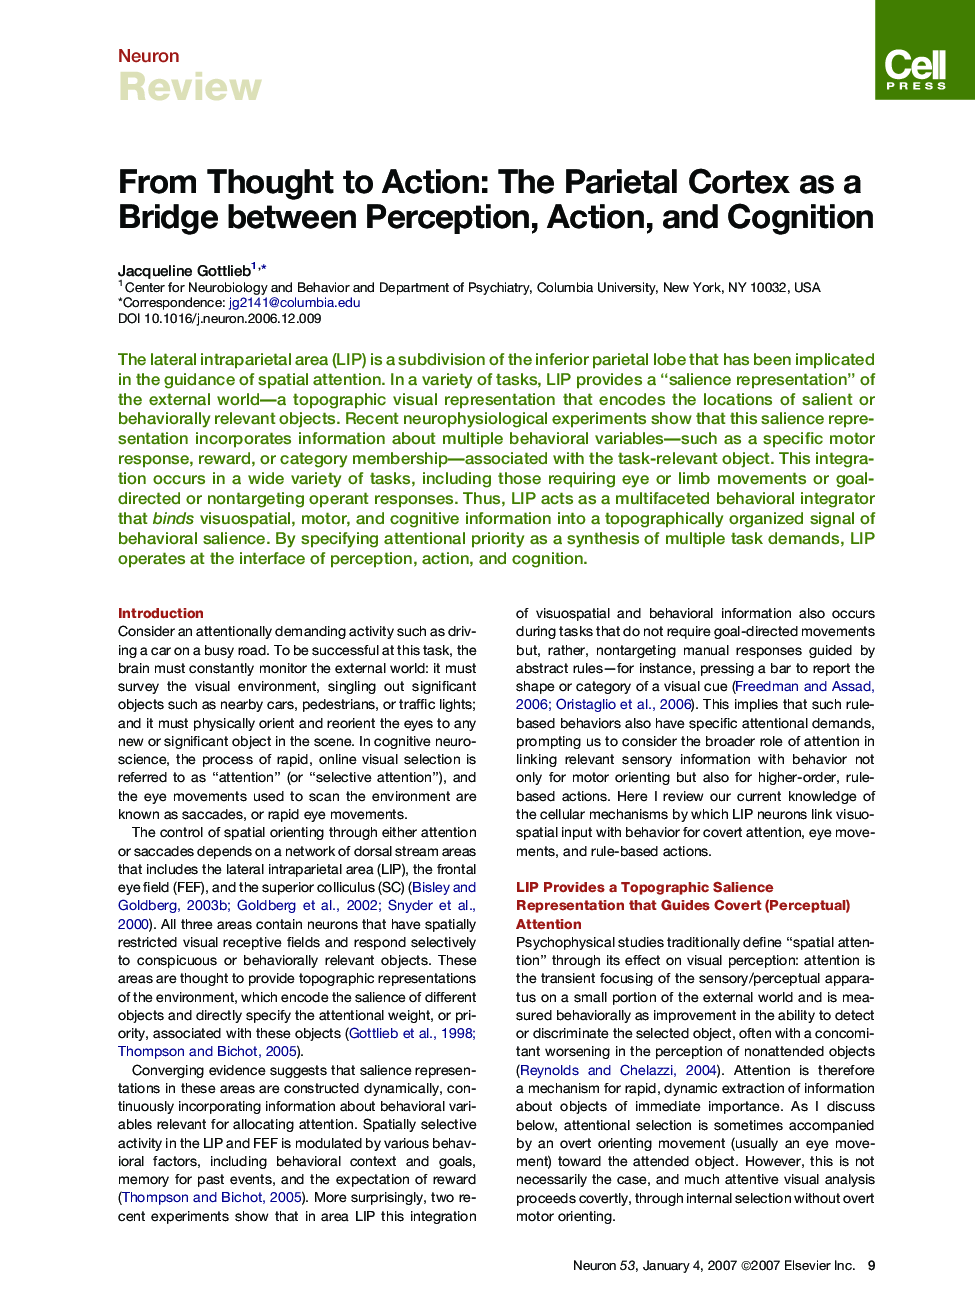 From Thought to Action: The Parietal Cortex as a Bridge between Perception, Action, and Cognition